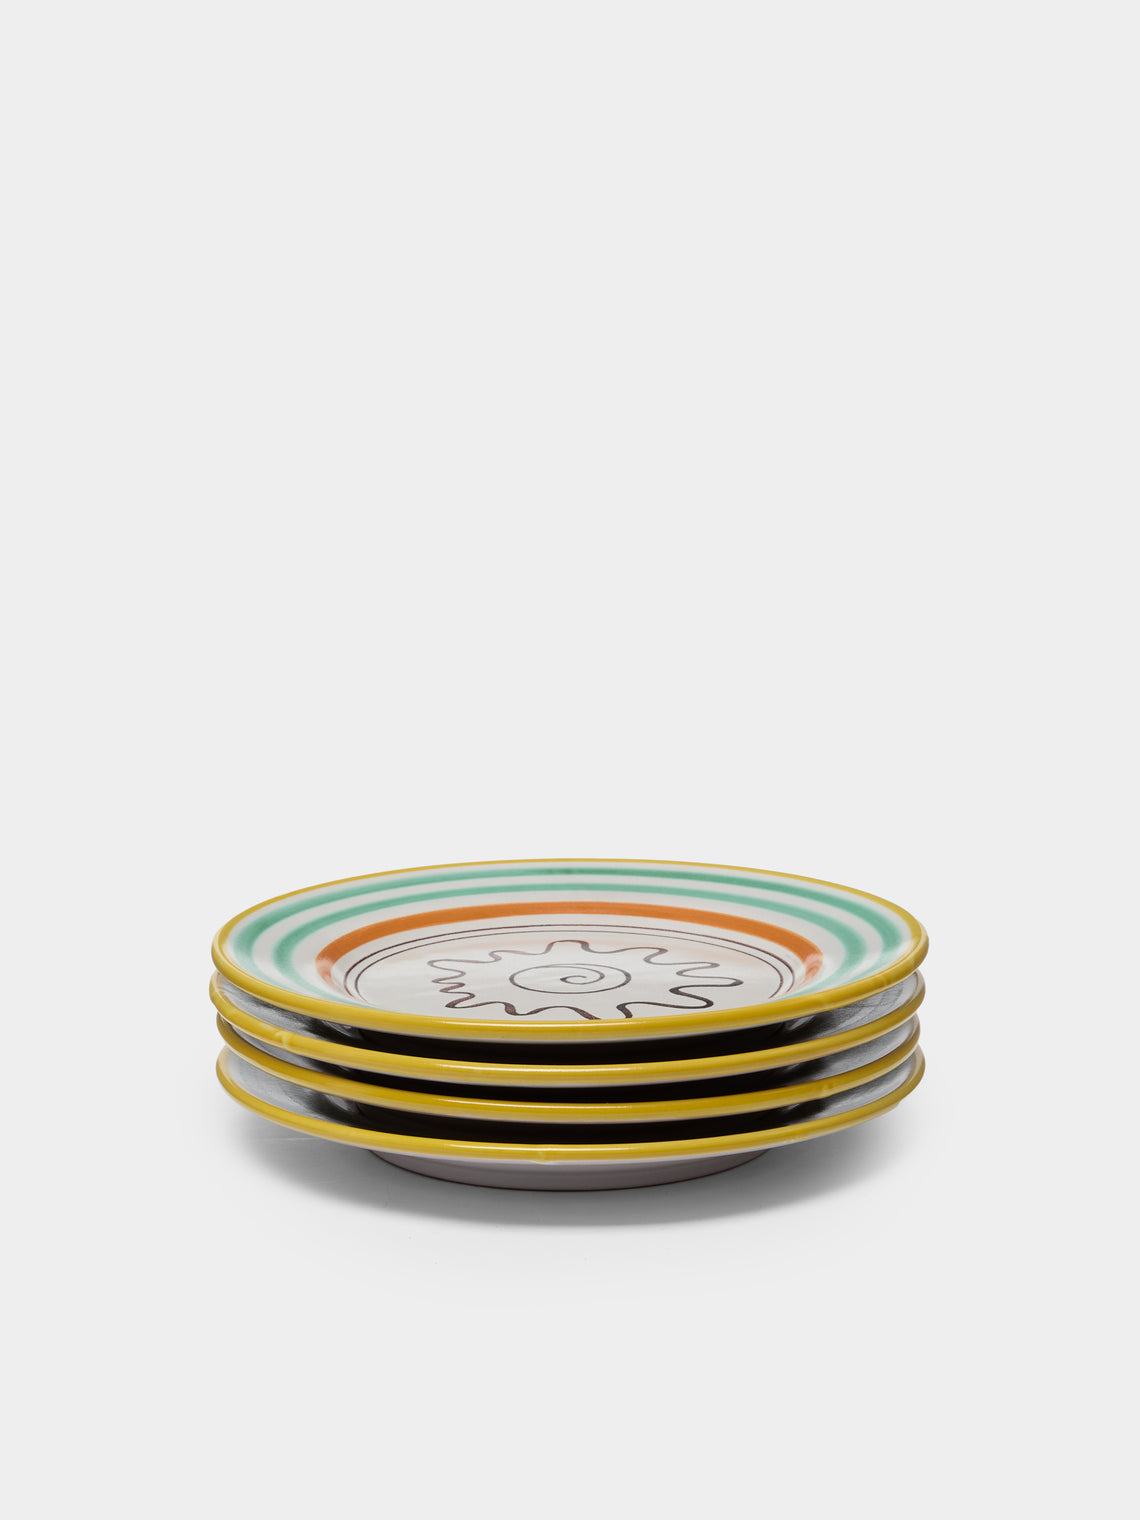 Ceramica Pinto - Vietri Hand-Painted Side Plates (Set of 4) -  - ABASK